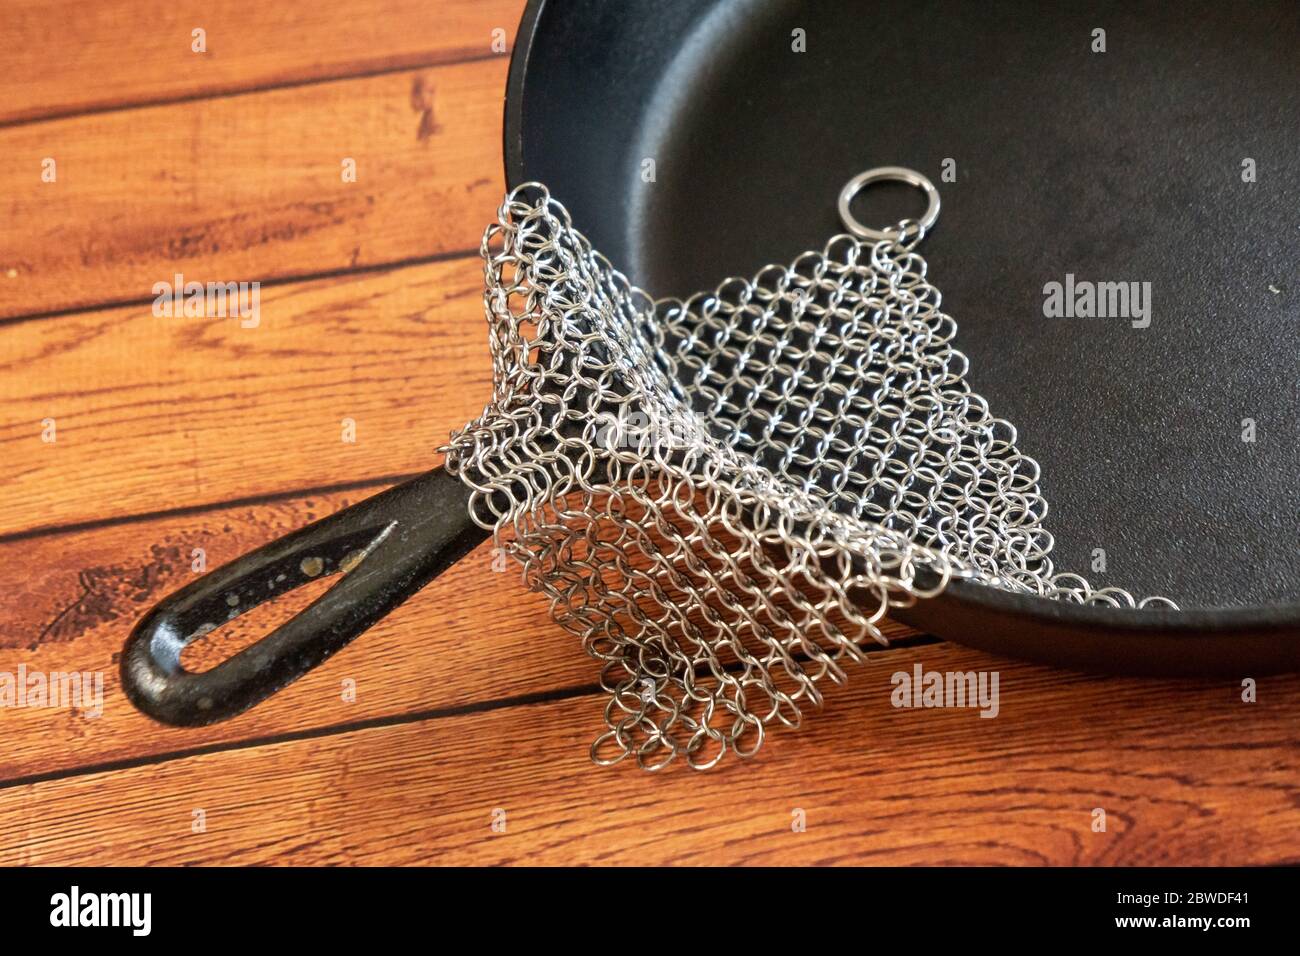 https://c8.alamy.com/comp/2BWDF41/small-ring-chainmail-scrubber-for-cast-iron-stainless-steel-hard-anodized-cookware-and-other-pots-pans-for-for-cast-iron-cookware-dutch-ovens-2BWDF41.jpg